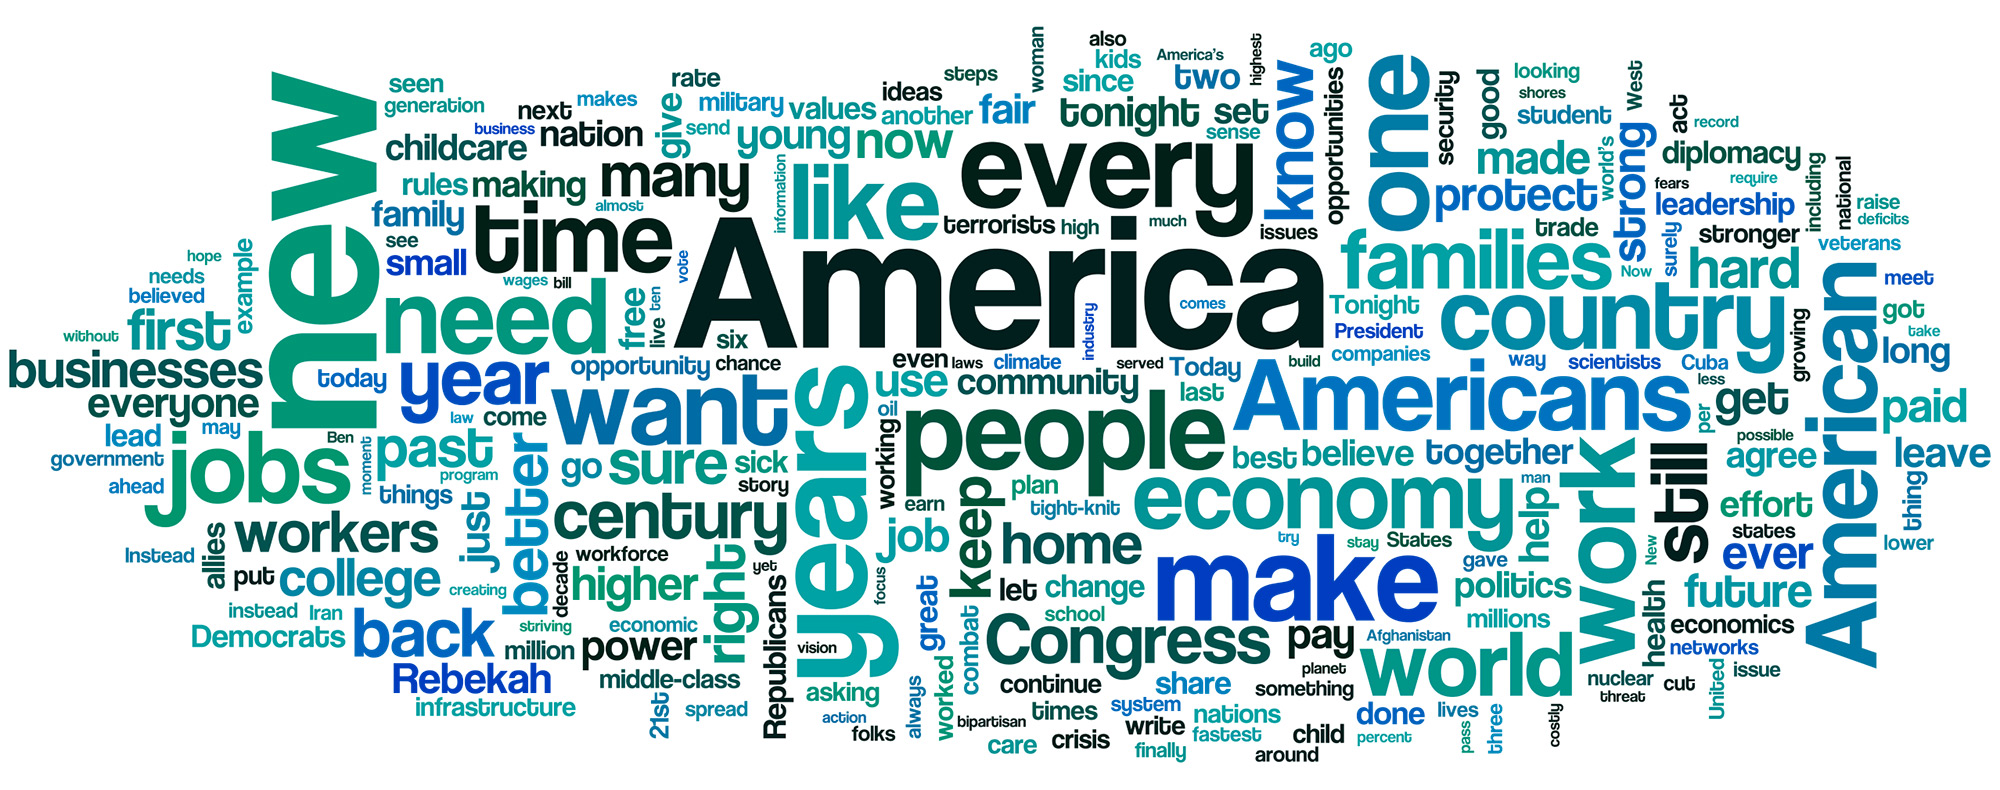 Believe tonight. Words of Frequency. Word cloud visualization.